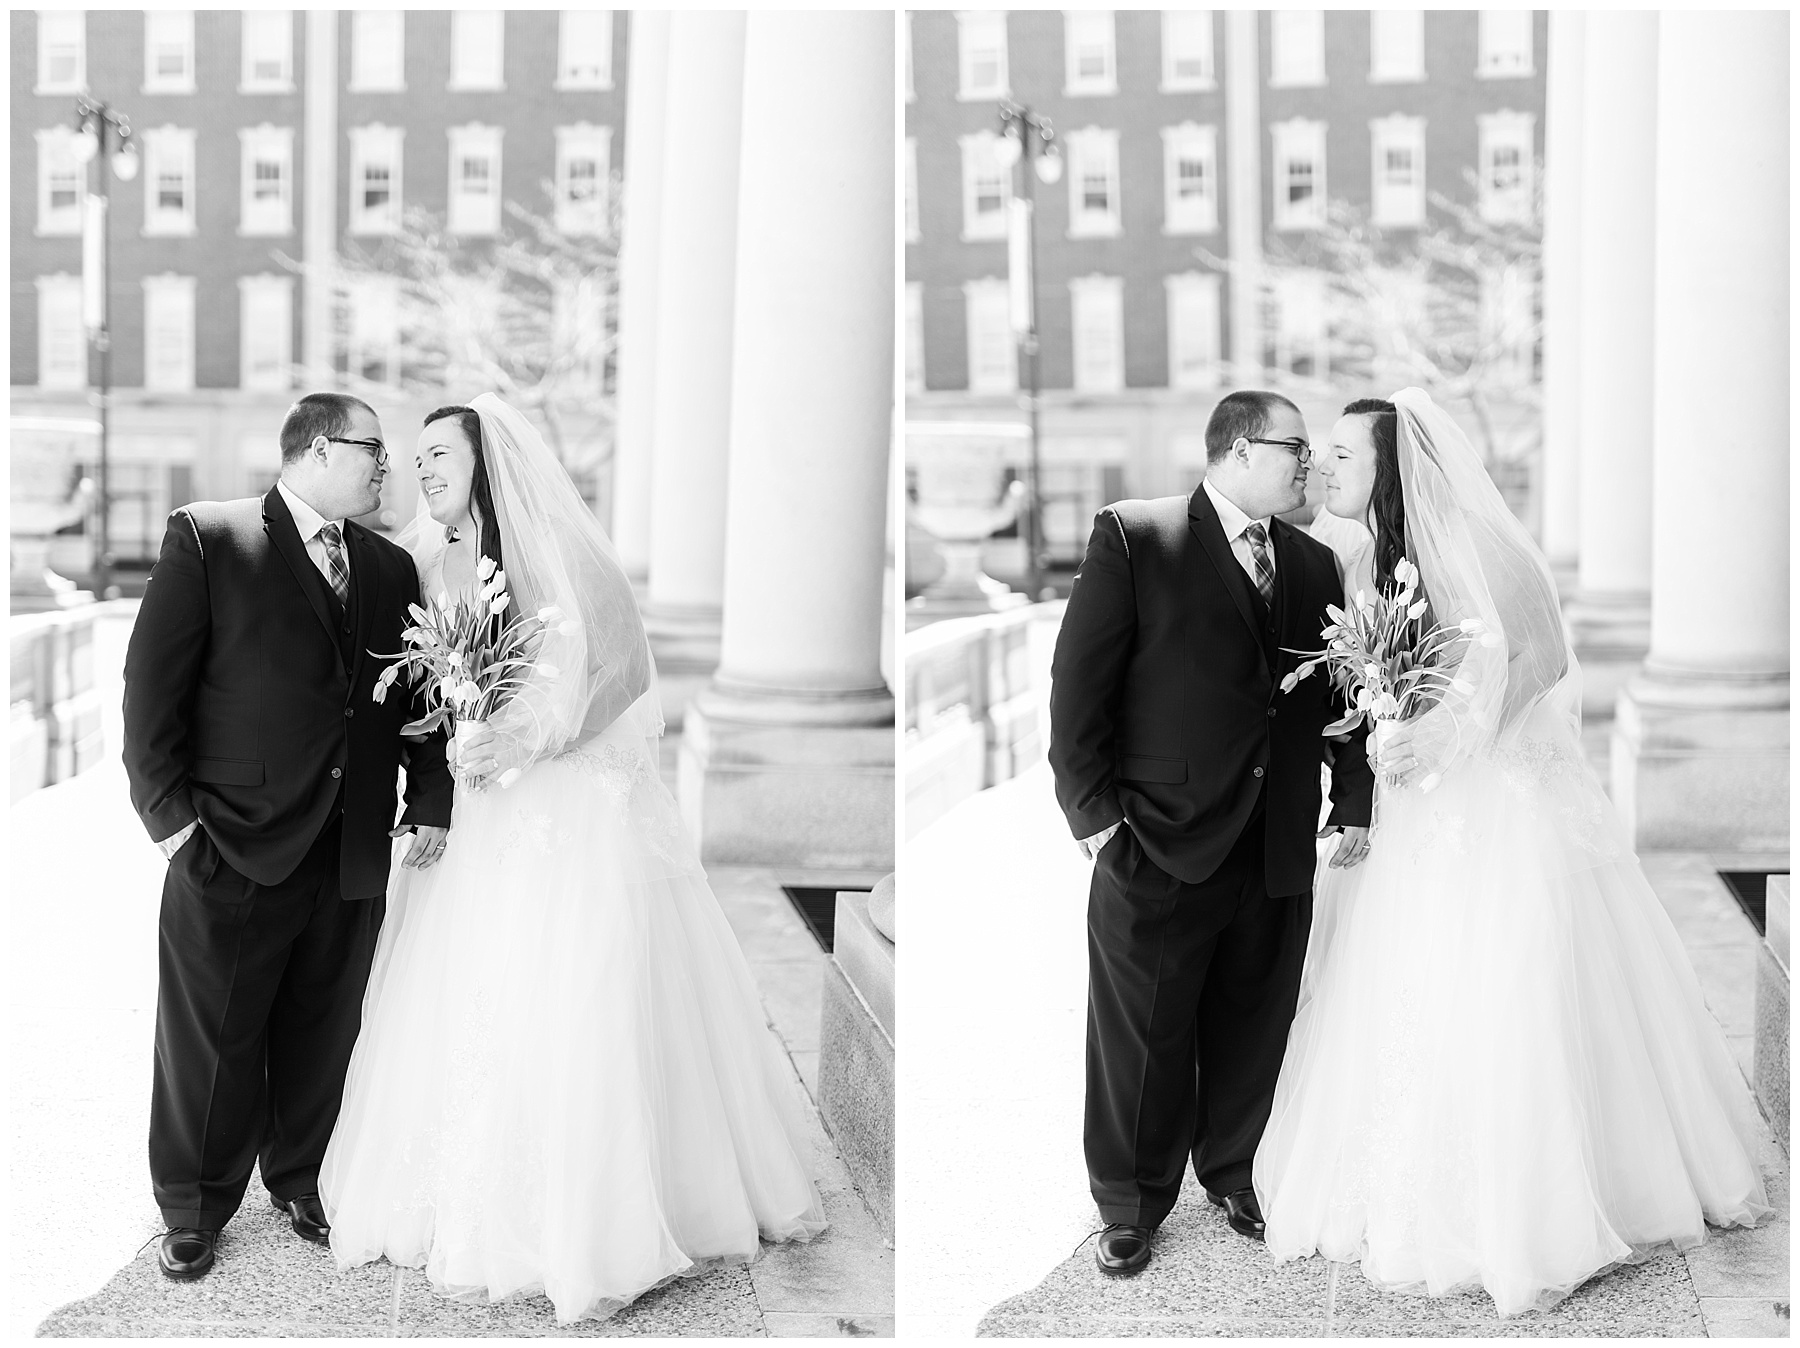 plus size couple in wedding attire taking wedding photos in downtown portland maine at city hall kissing holding tulips